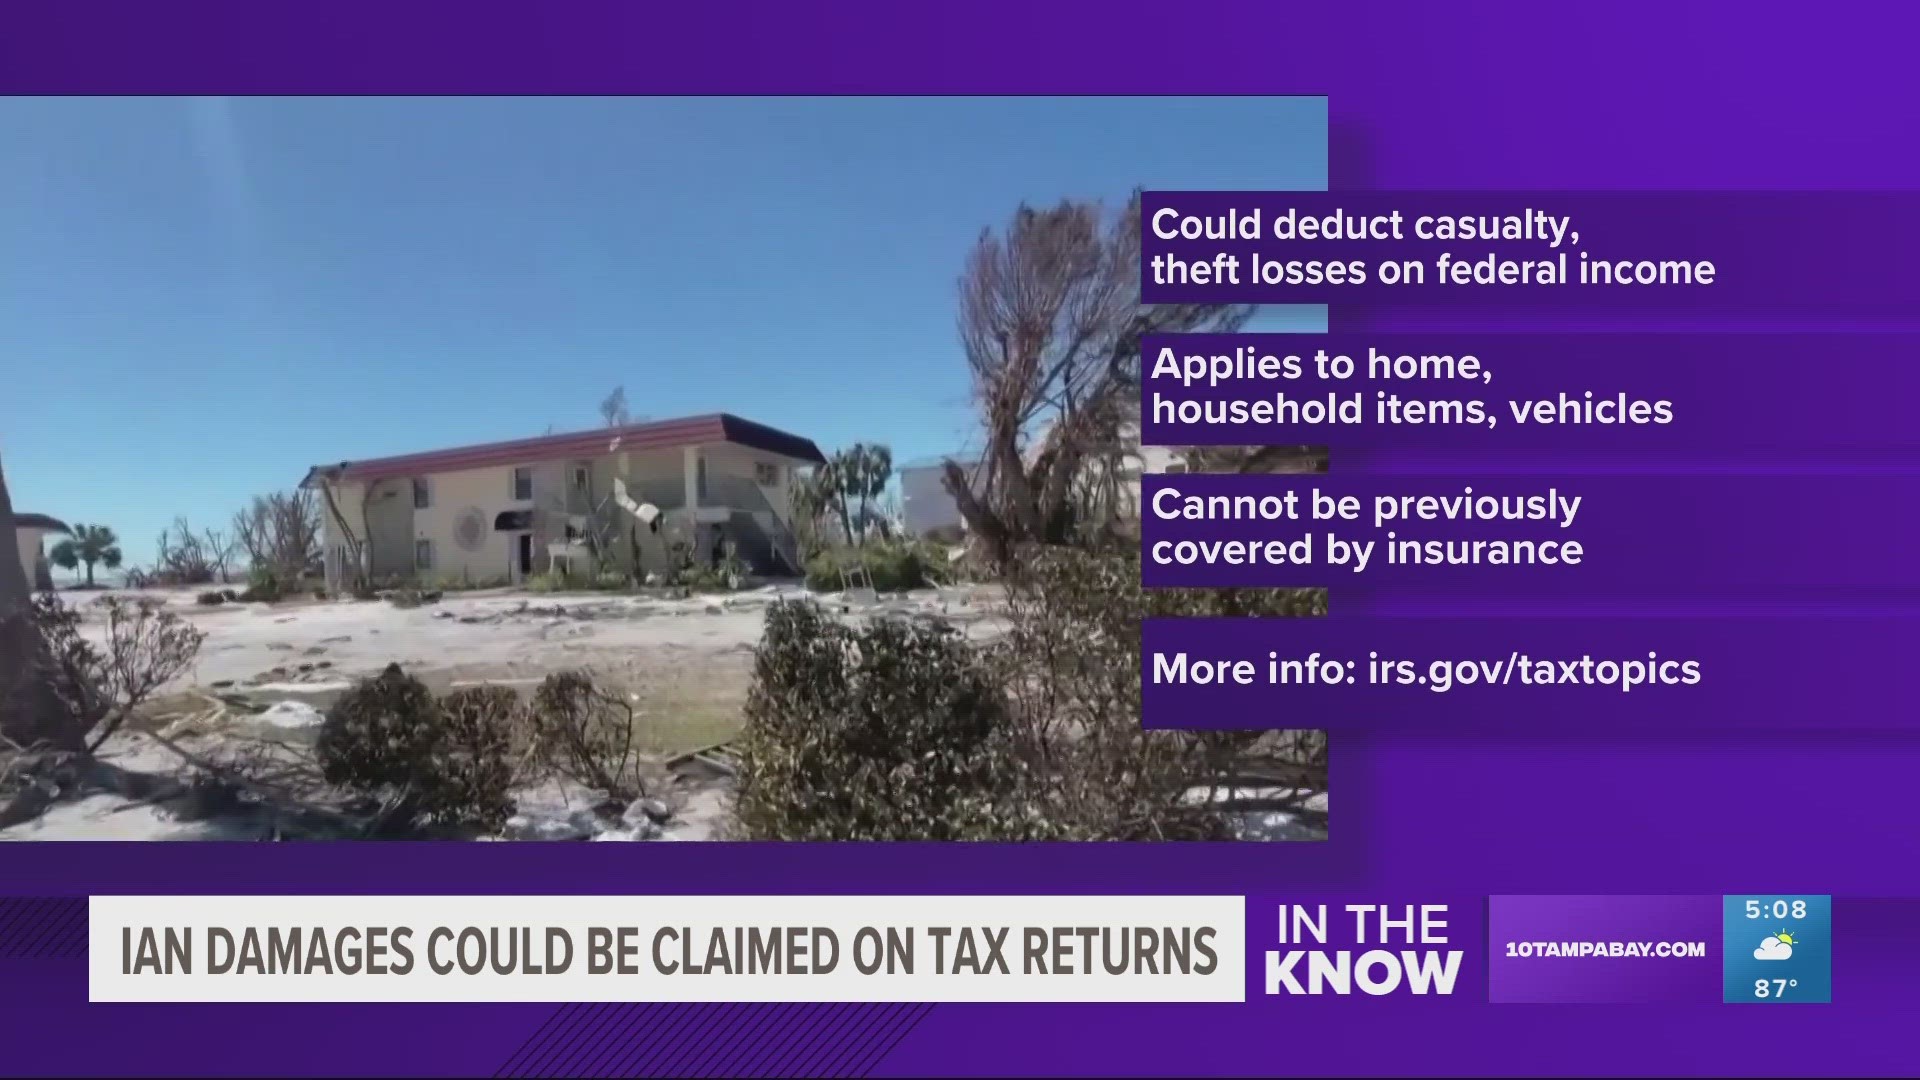 If you were affected by Hurricane Ian last year, you might be able to claim some of the loss on your taxes.